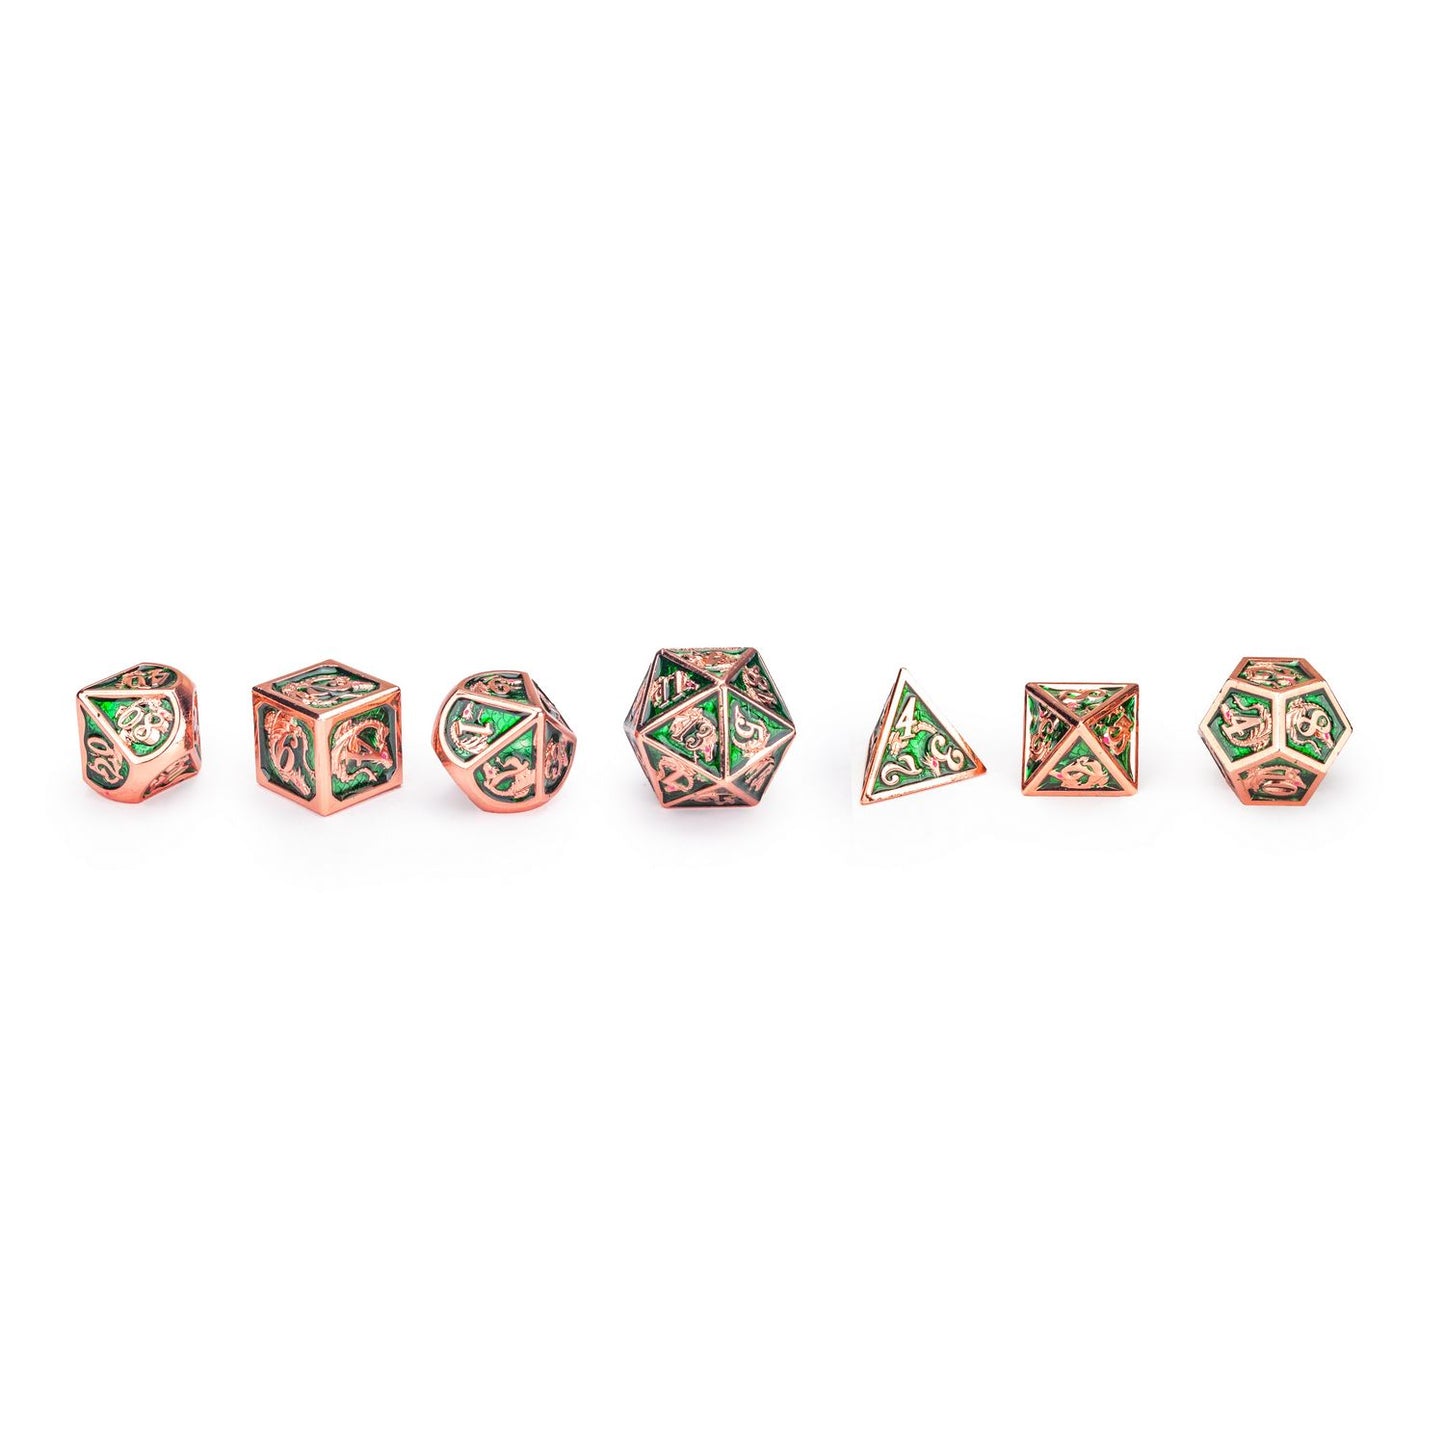 Copper Emerald metal dragon dice set for dungeons and dragons